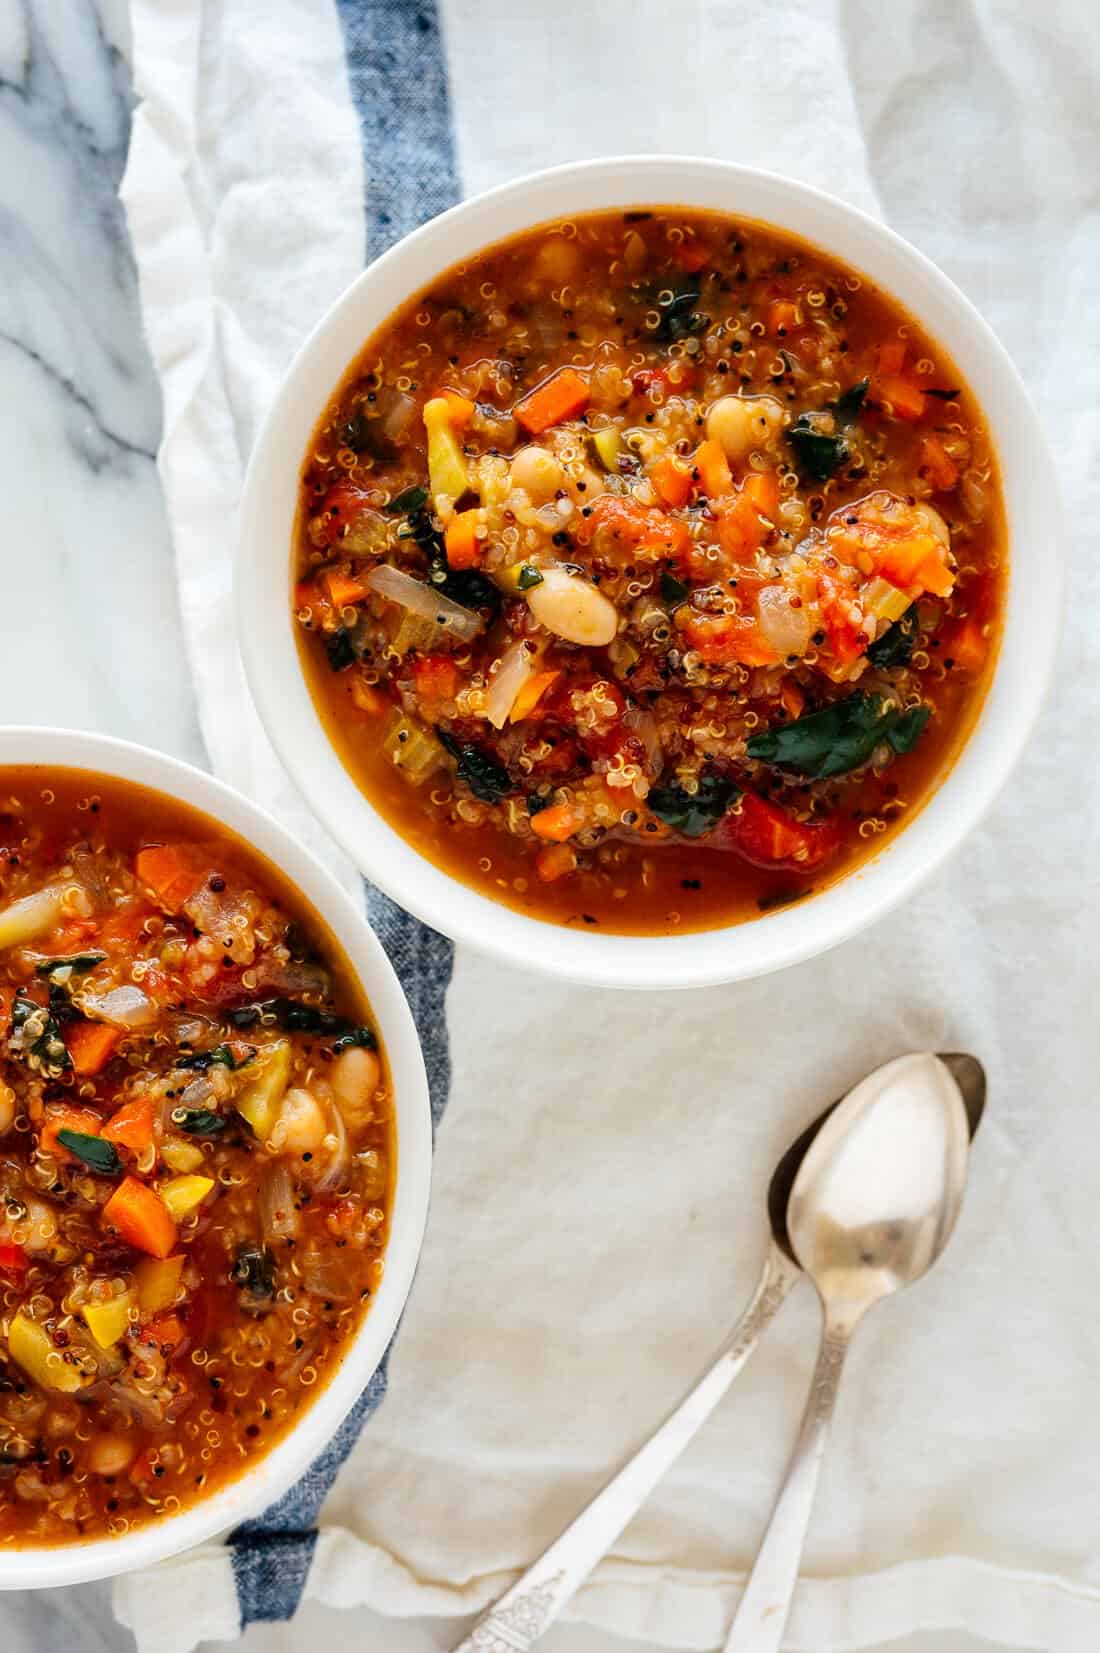 11 Delicious Recipes for Vegetarian Soups - this healthy table